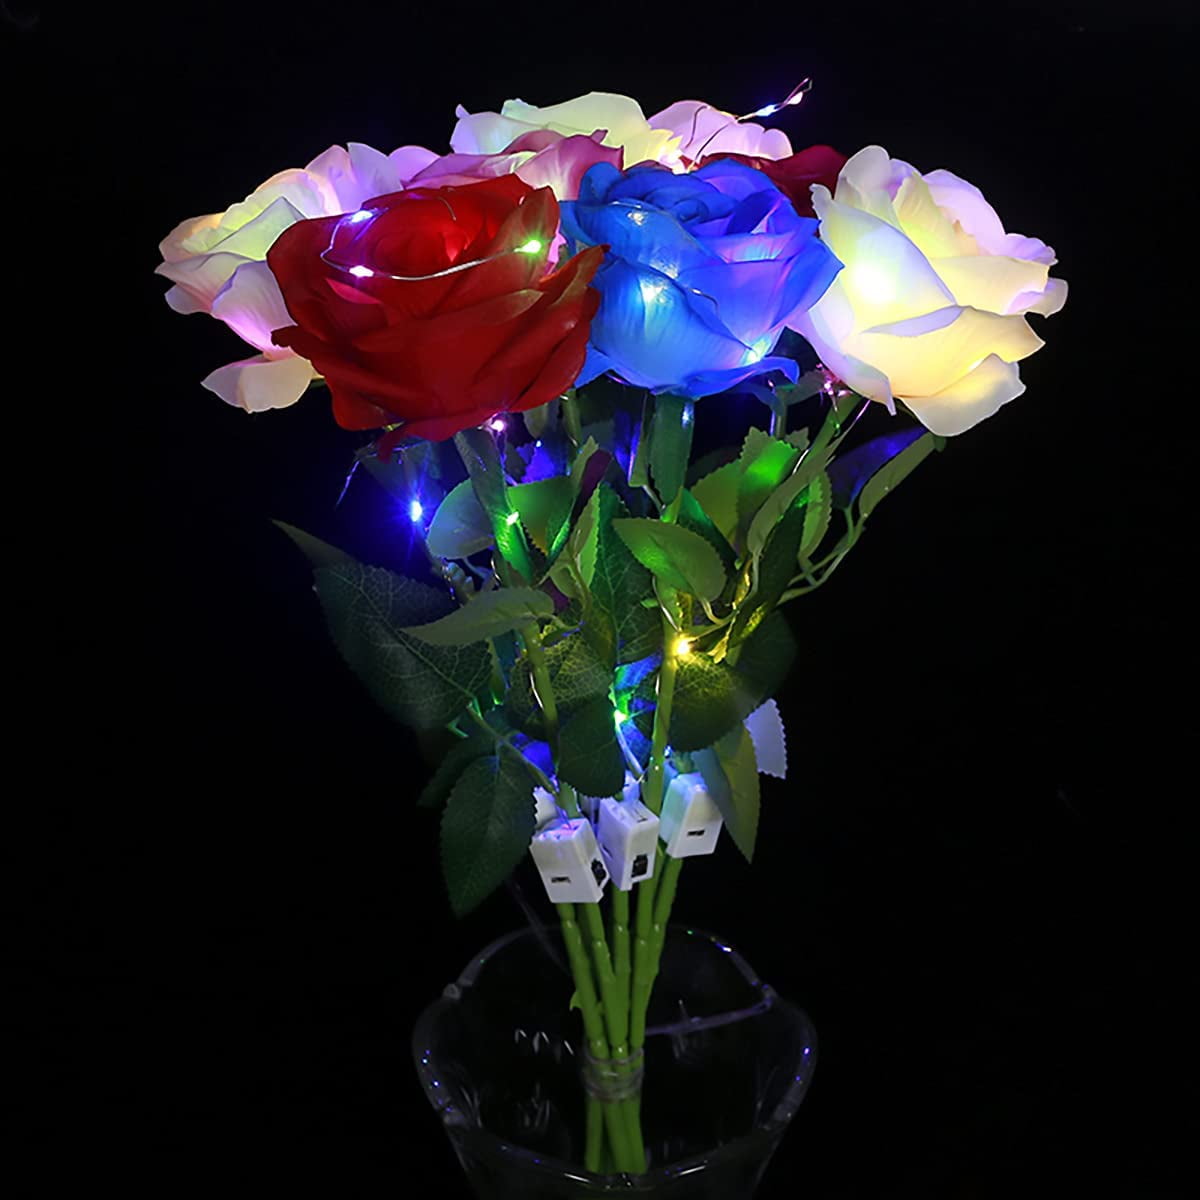 Cream Plum Roses Bouquet in FREE vase 20 LED battery lights wedding display 